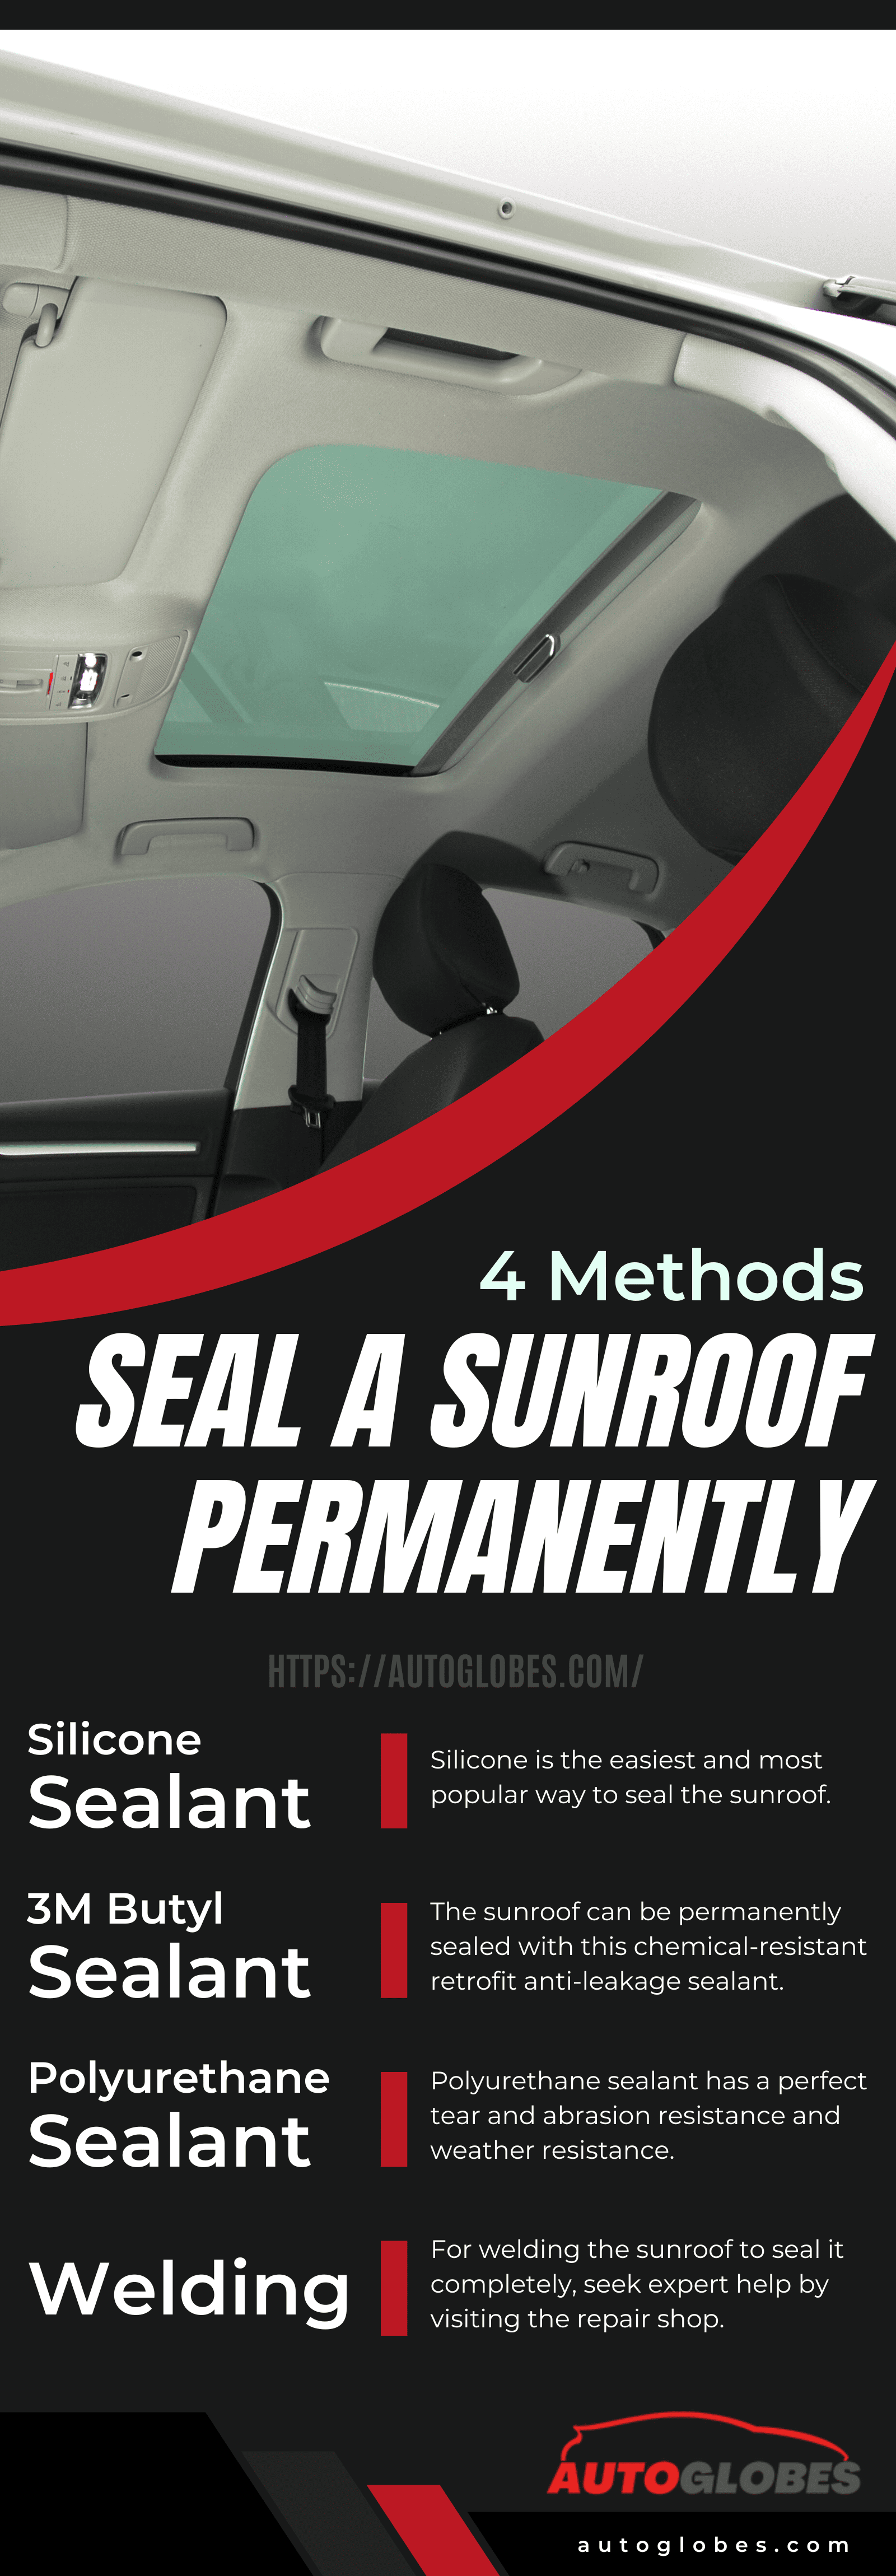 Seal a Sunroof Permanently Infographic